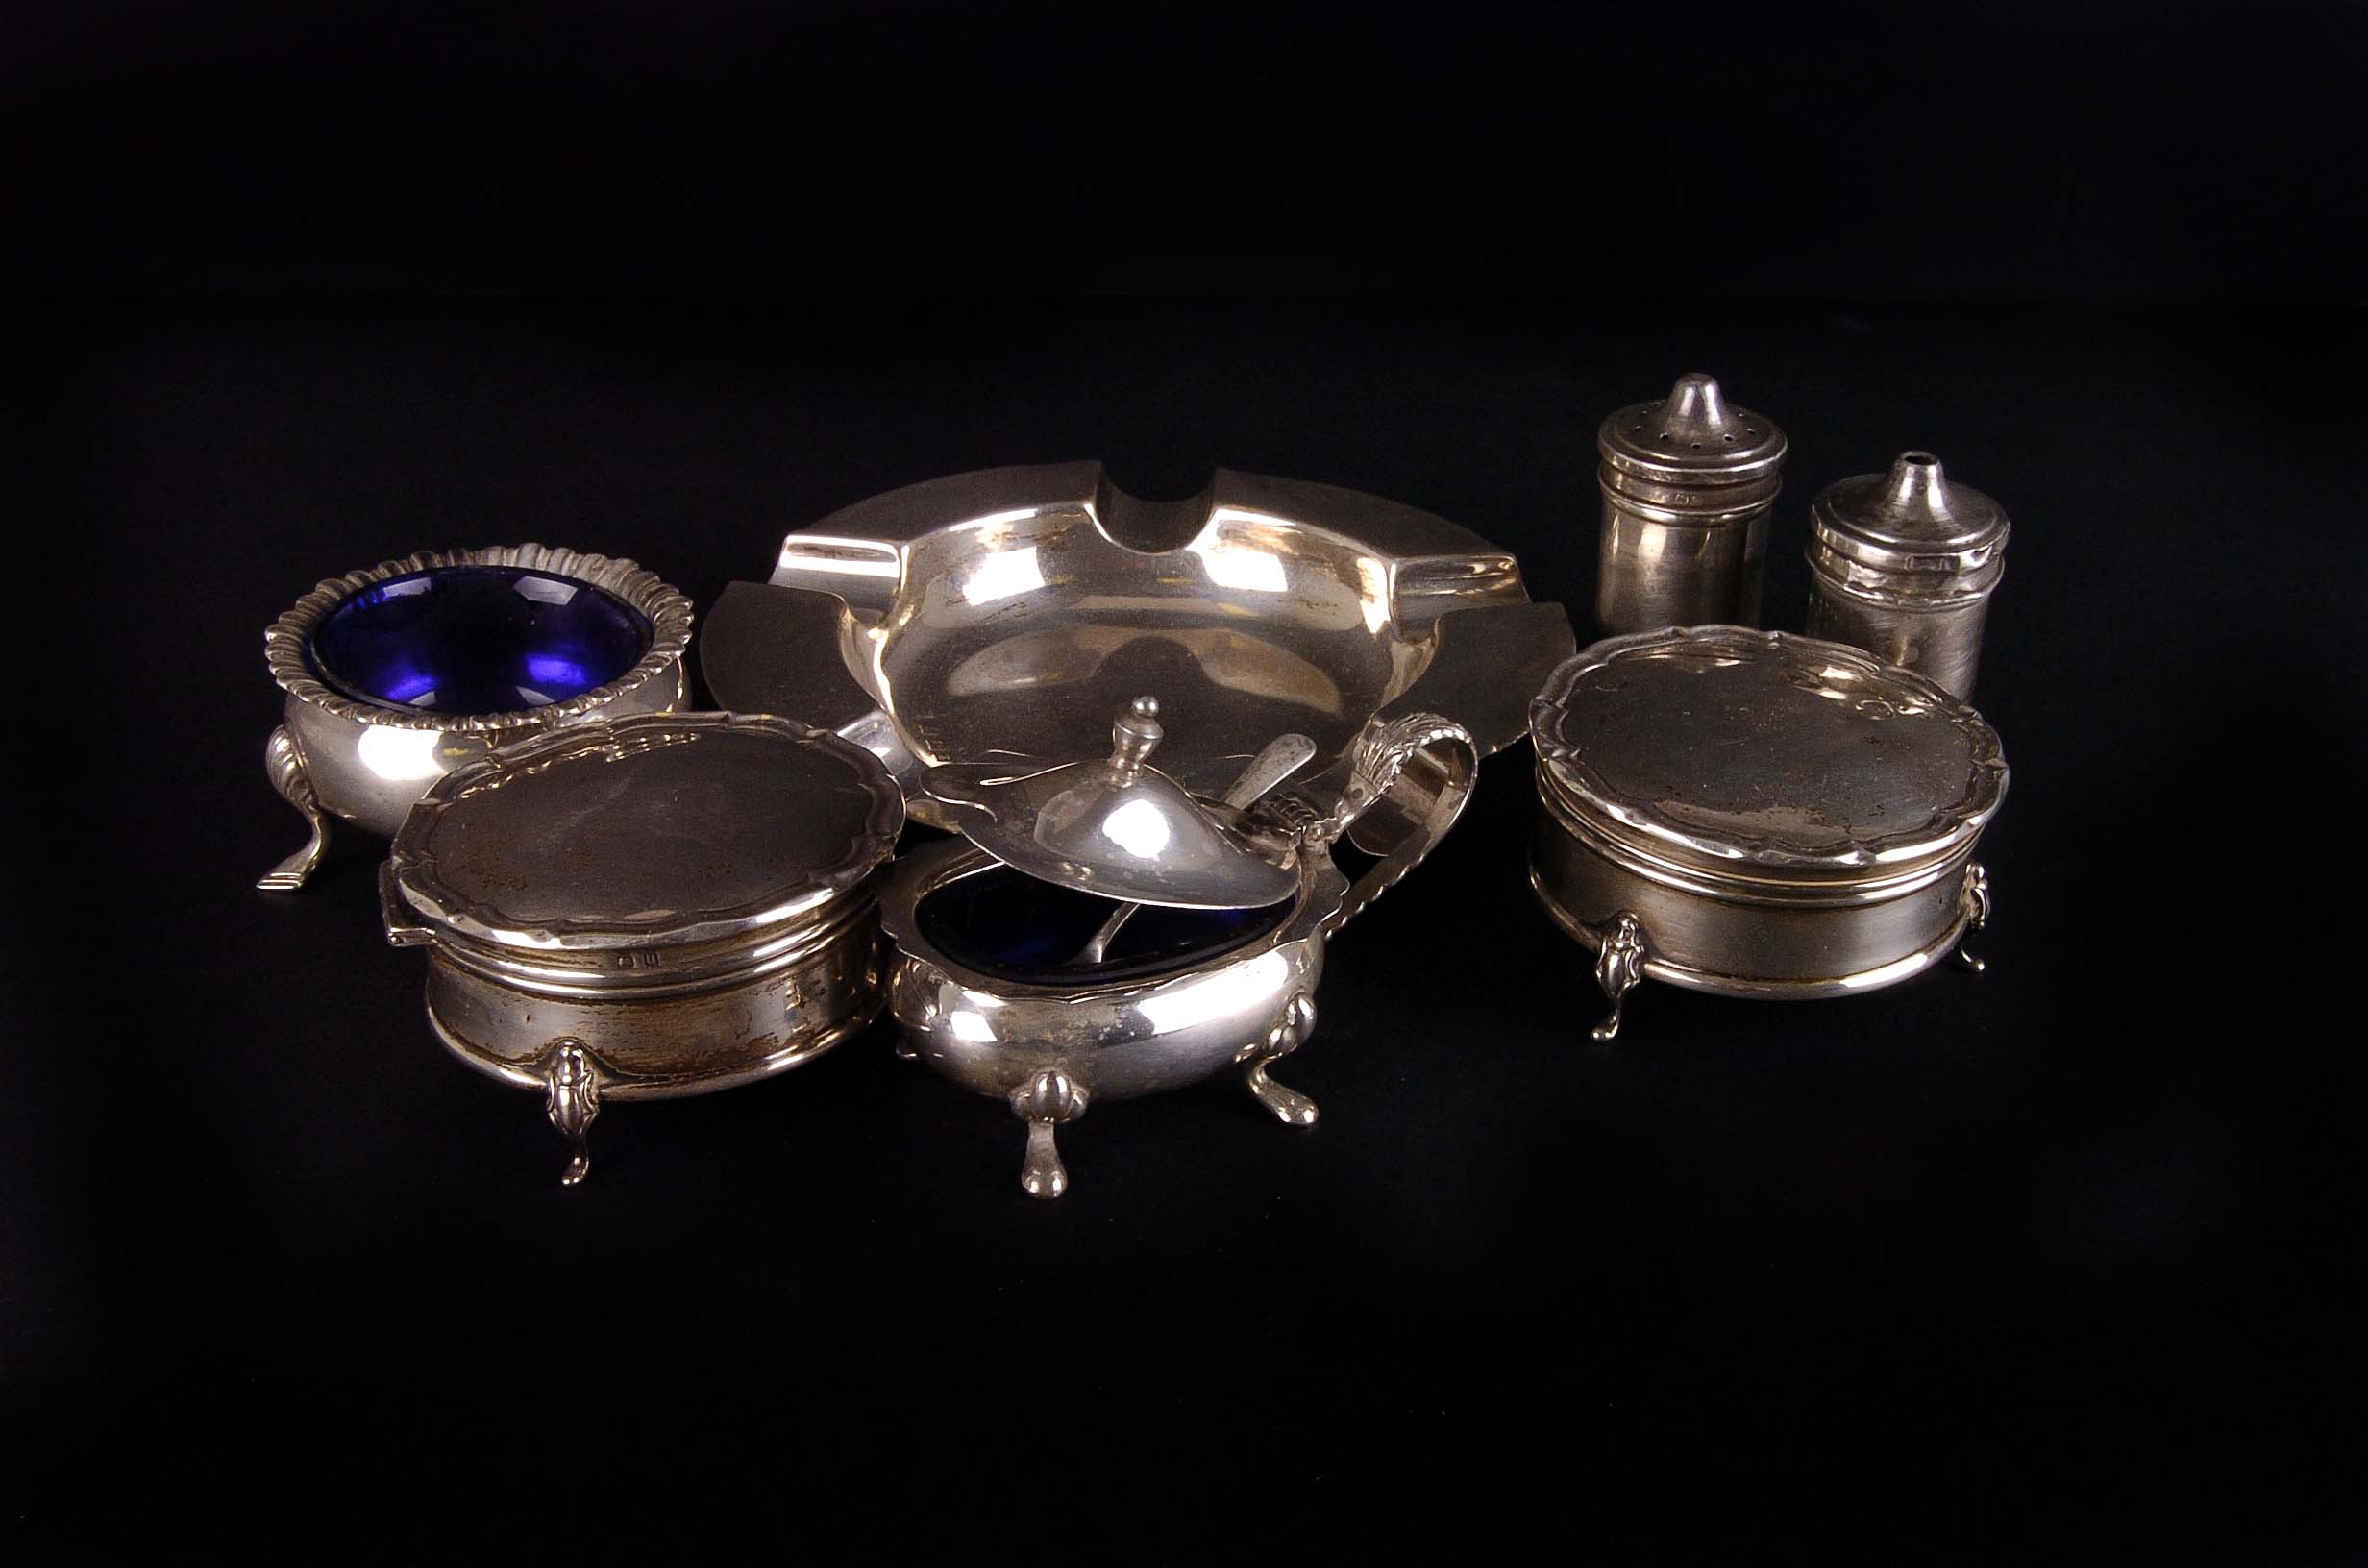 A collection of silver, including an ashtray, jewellery boxes, and cruet items 14ozt. gross